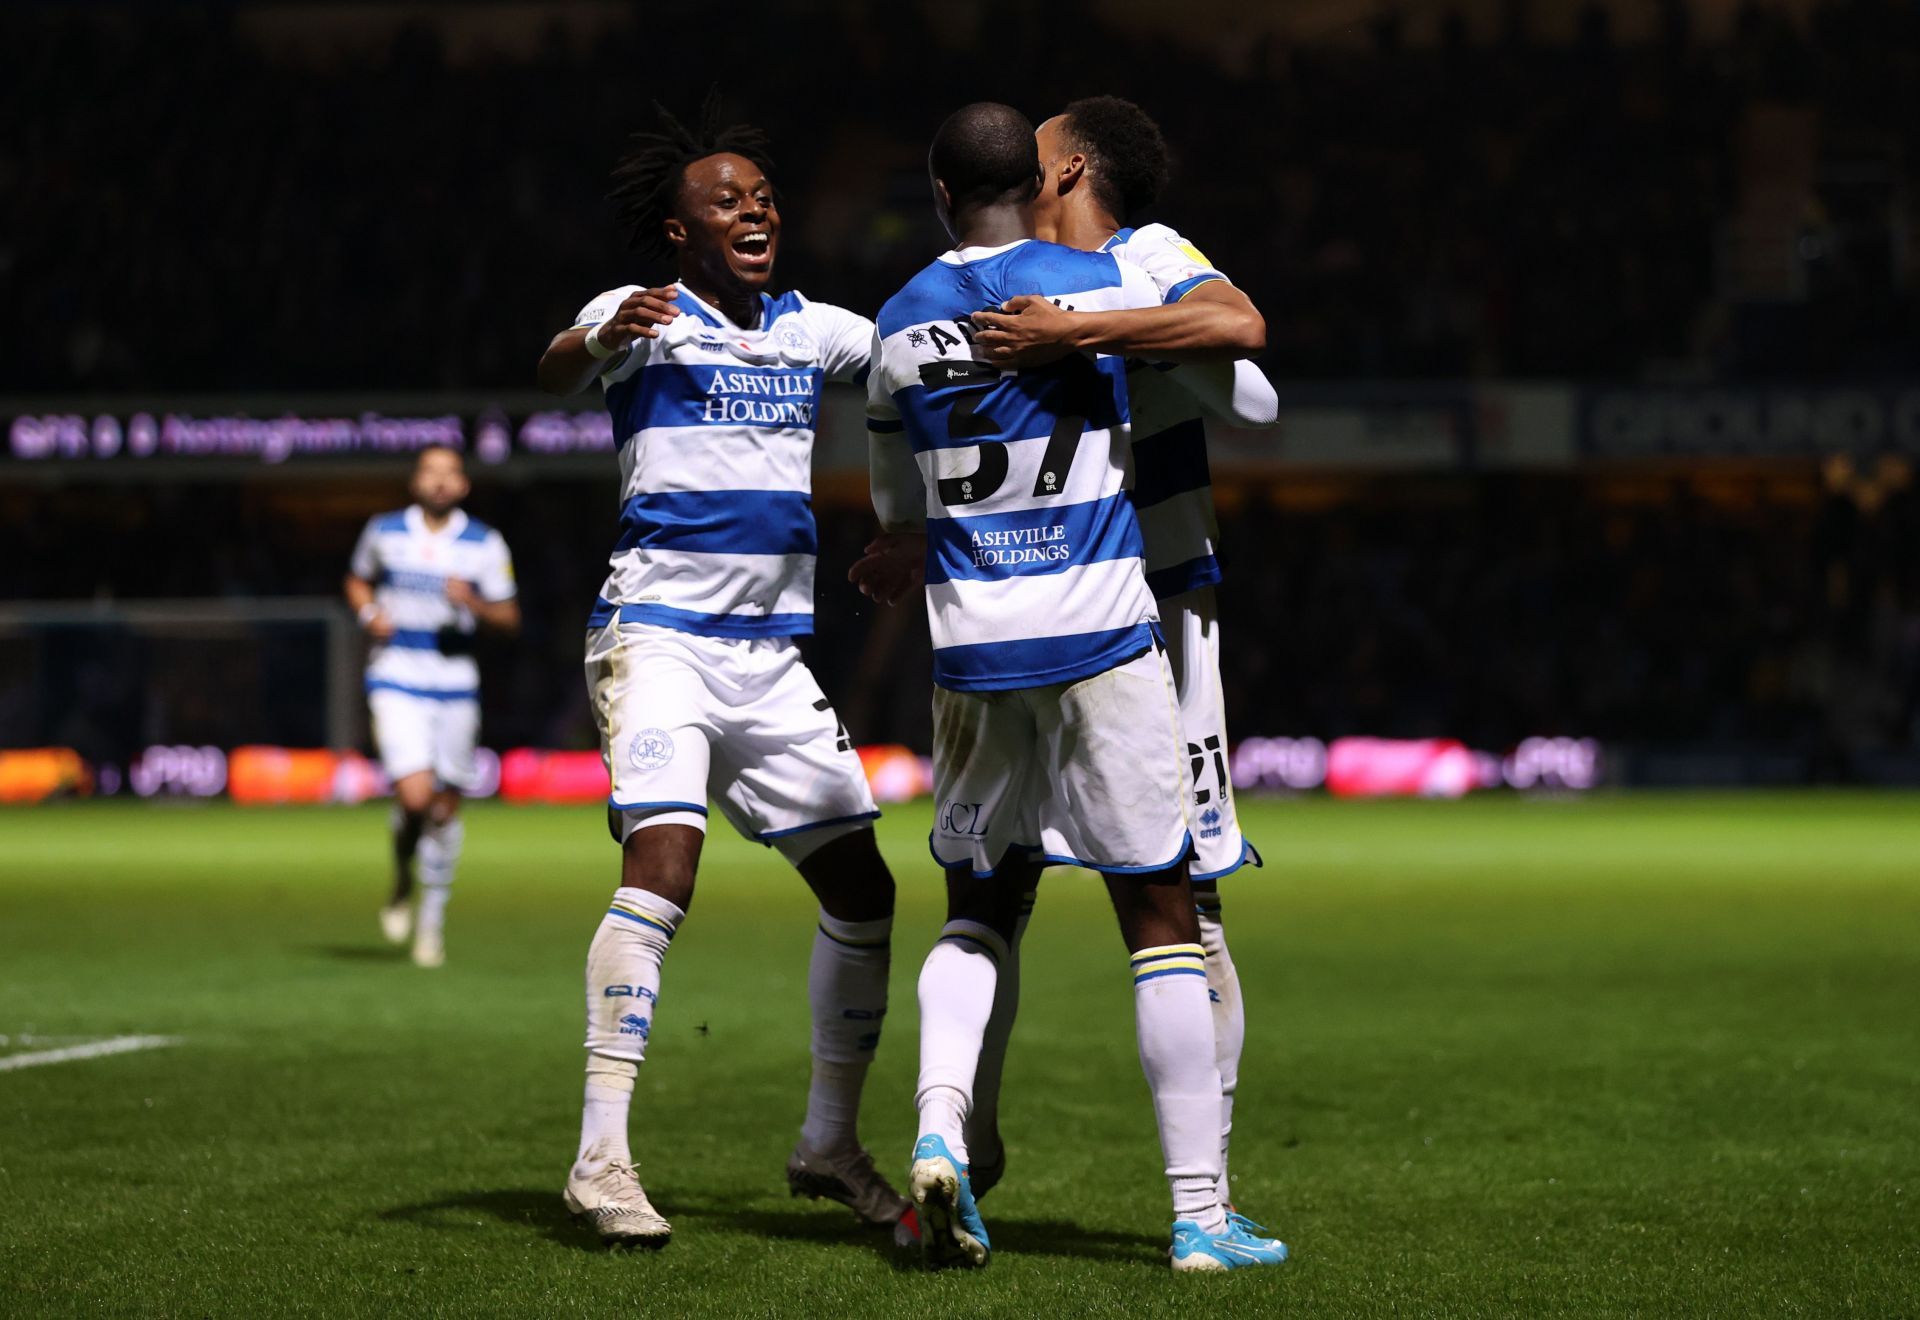 QPR are looking to get back to winning ways